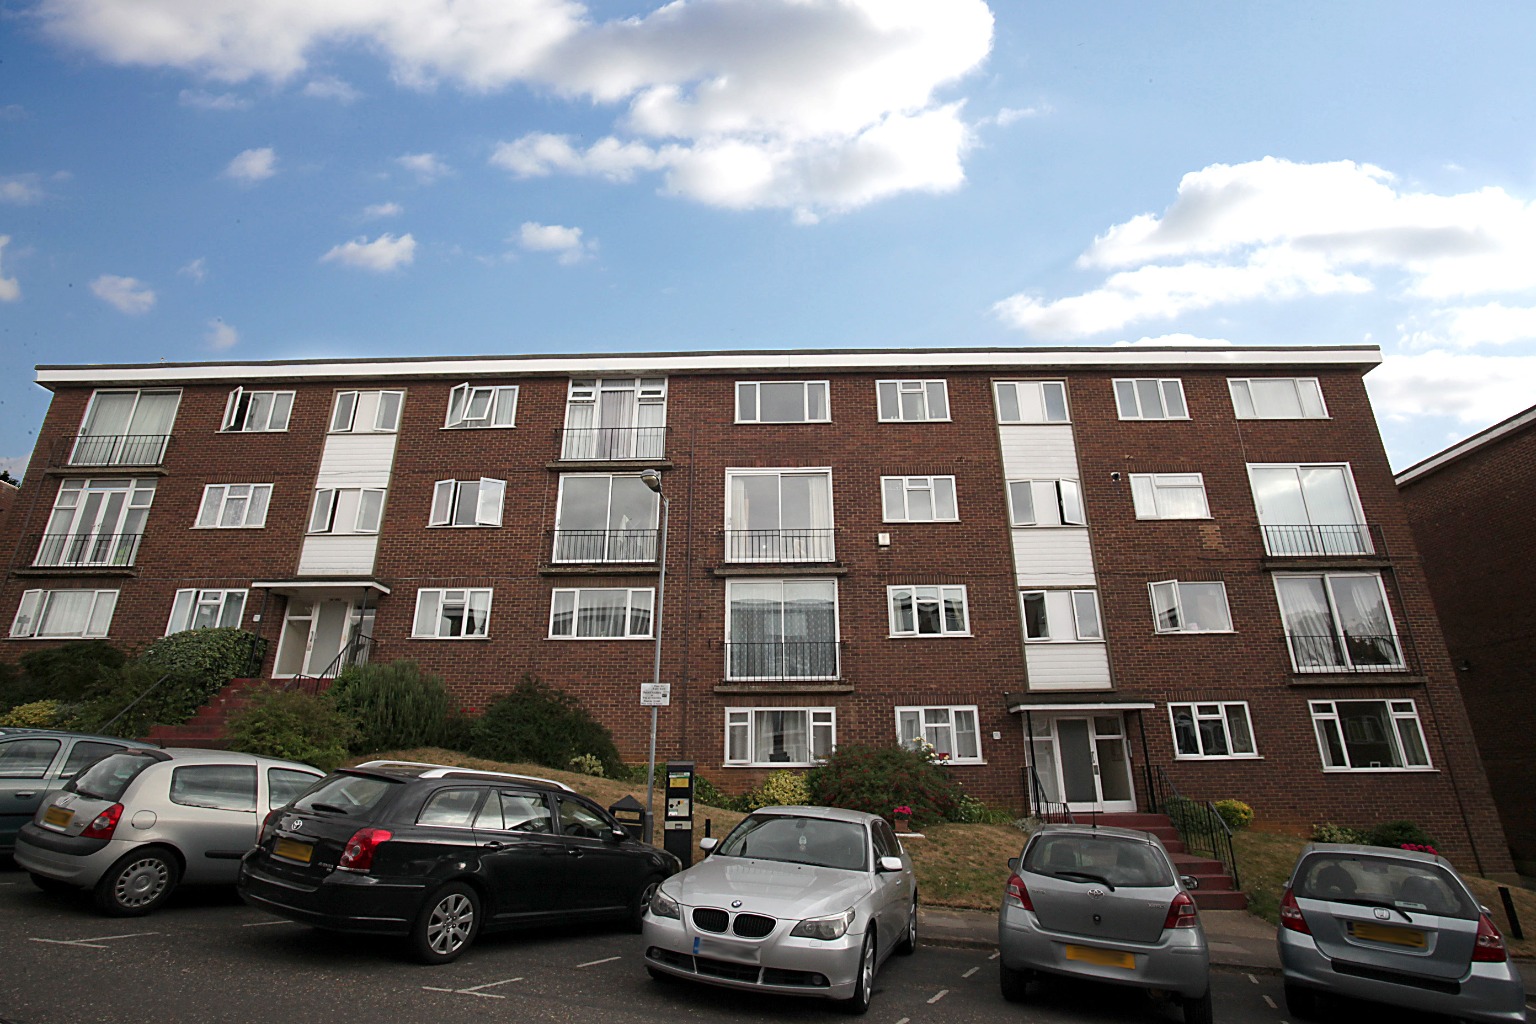 Giggs and Bell are delighted to offer for sale this beautifully appointed two-bedroom duplex apartment. The property is ideally located with South West facing windows and there providing a light and airy living environment. Further benefits include double glazed windows, private balcony, and...